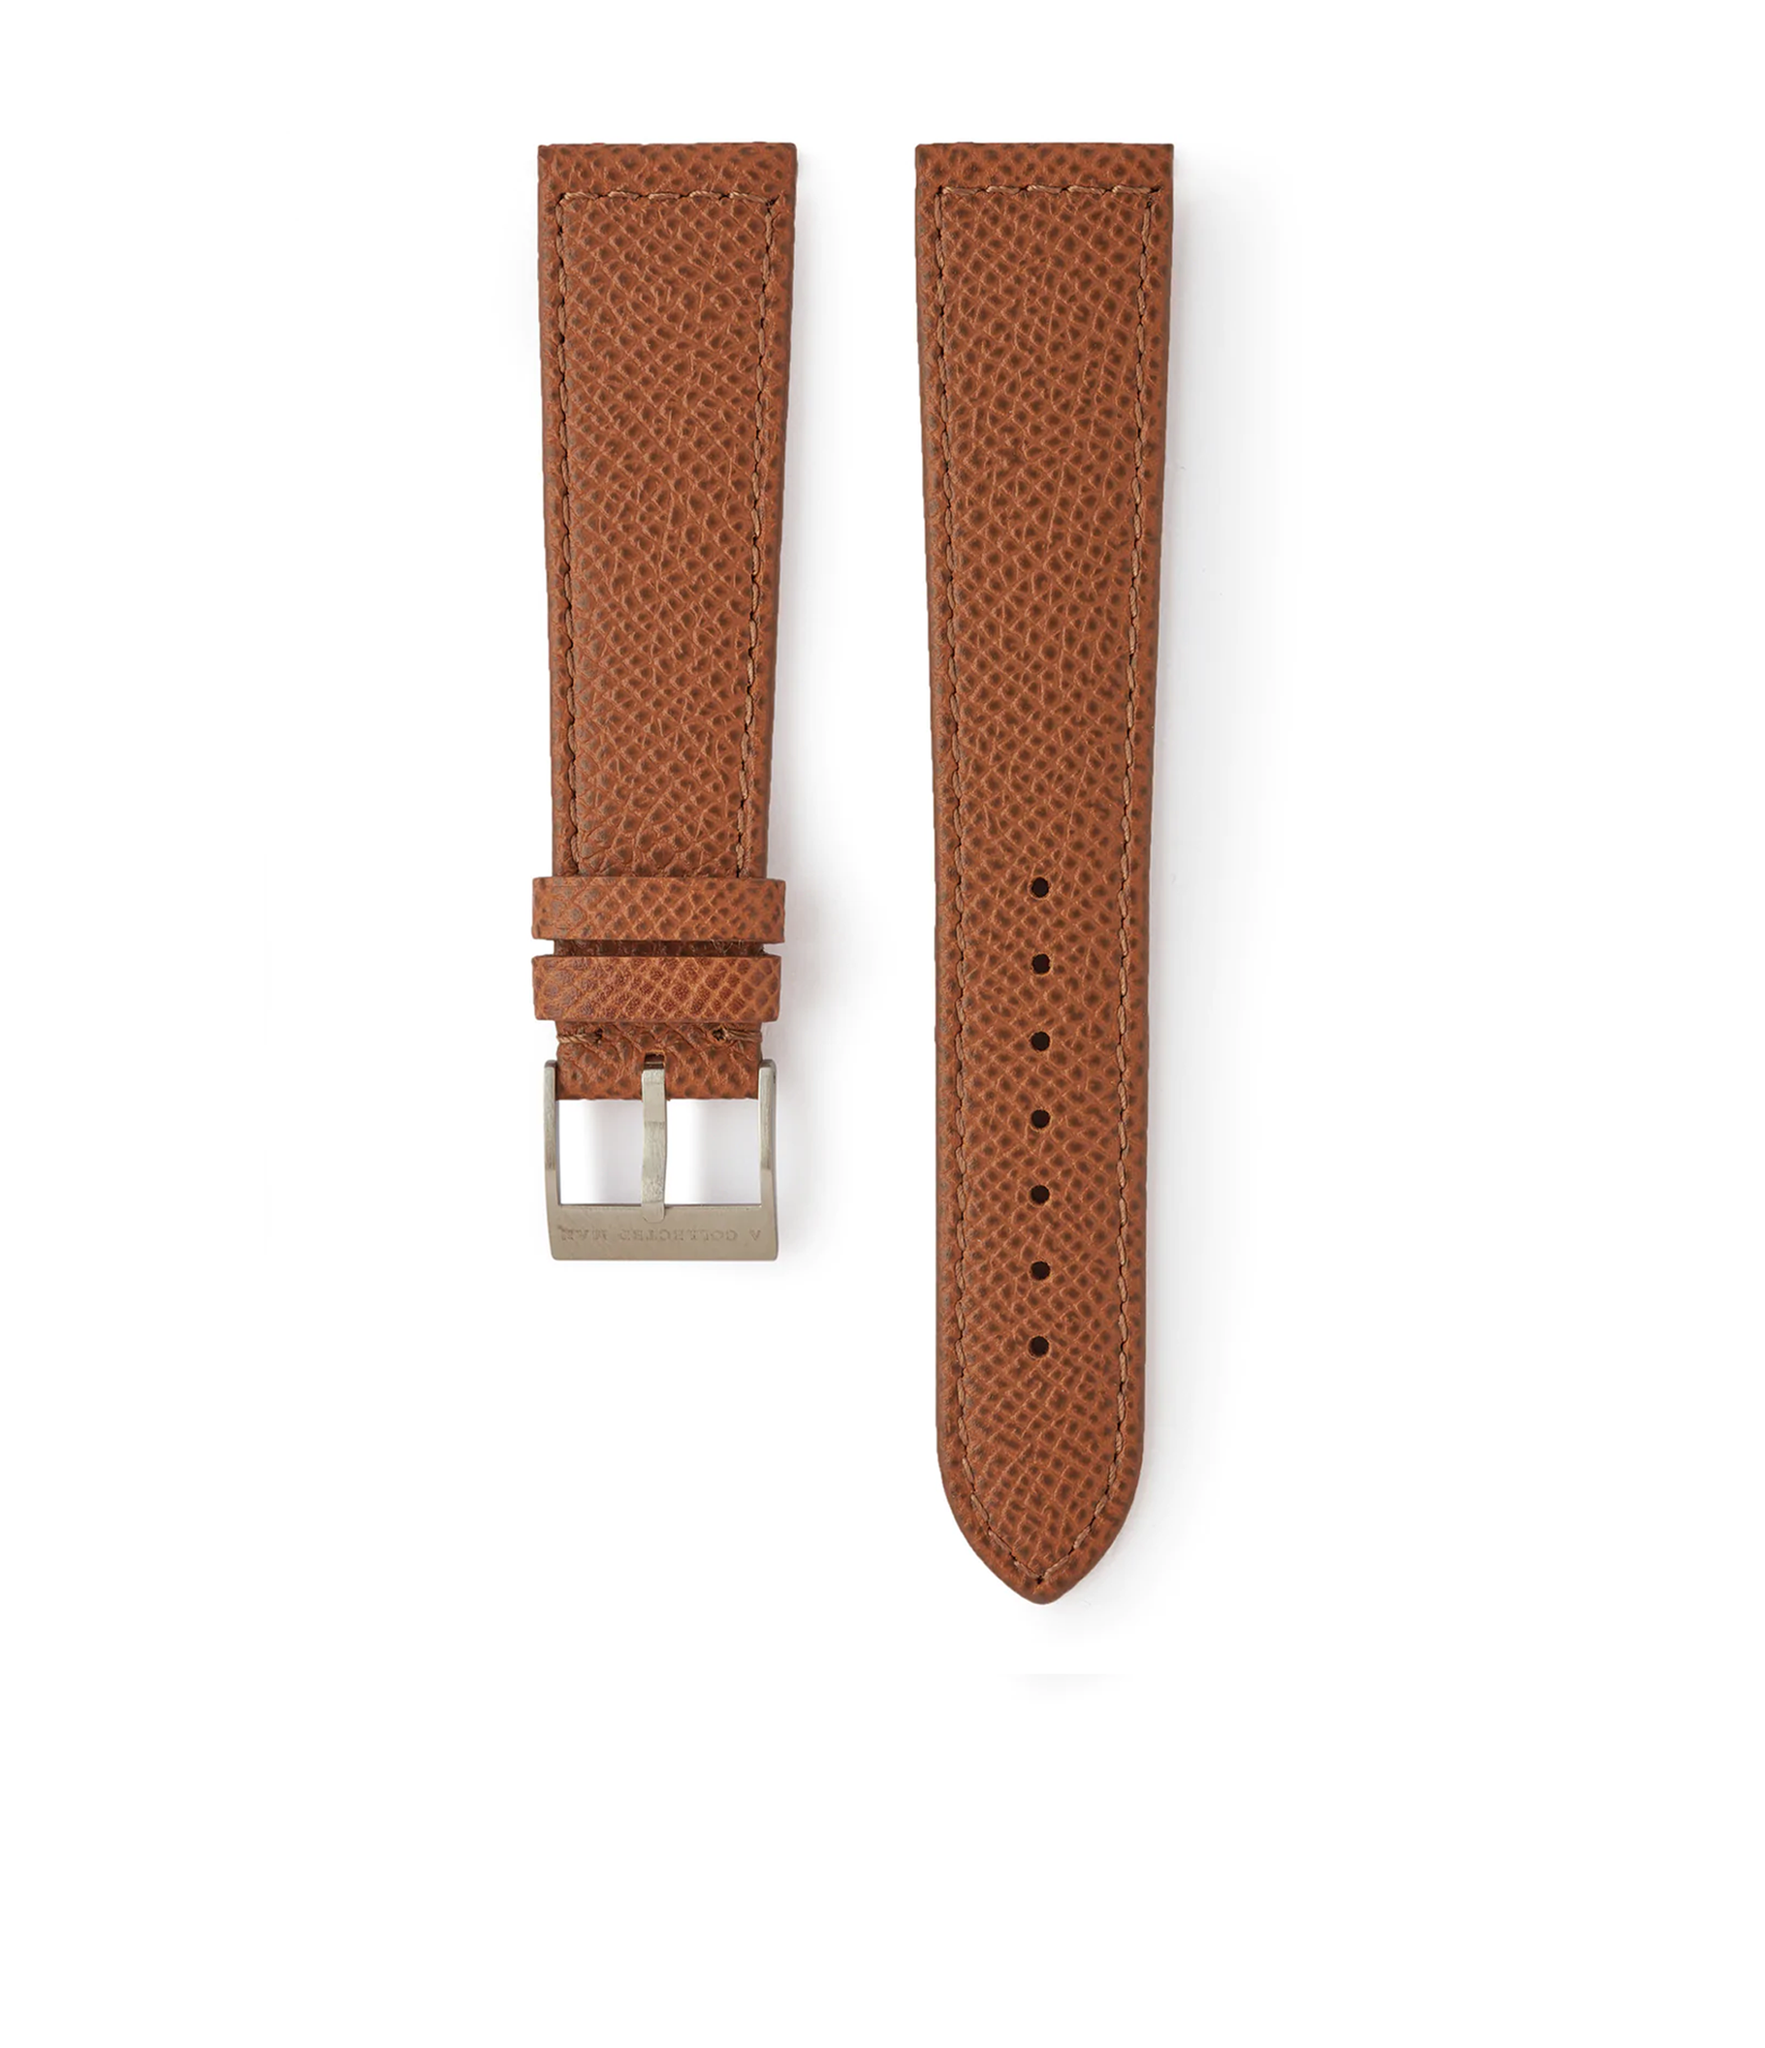 Buy Marrakesh II JPM watch strap safari tan brown saffiano leather box stitched quick-release springbars buckle handcrafted European-made for sale online at A Collected Man London